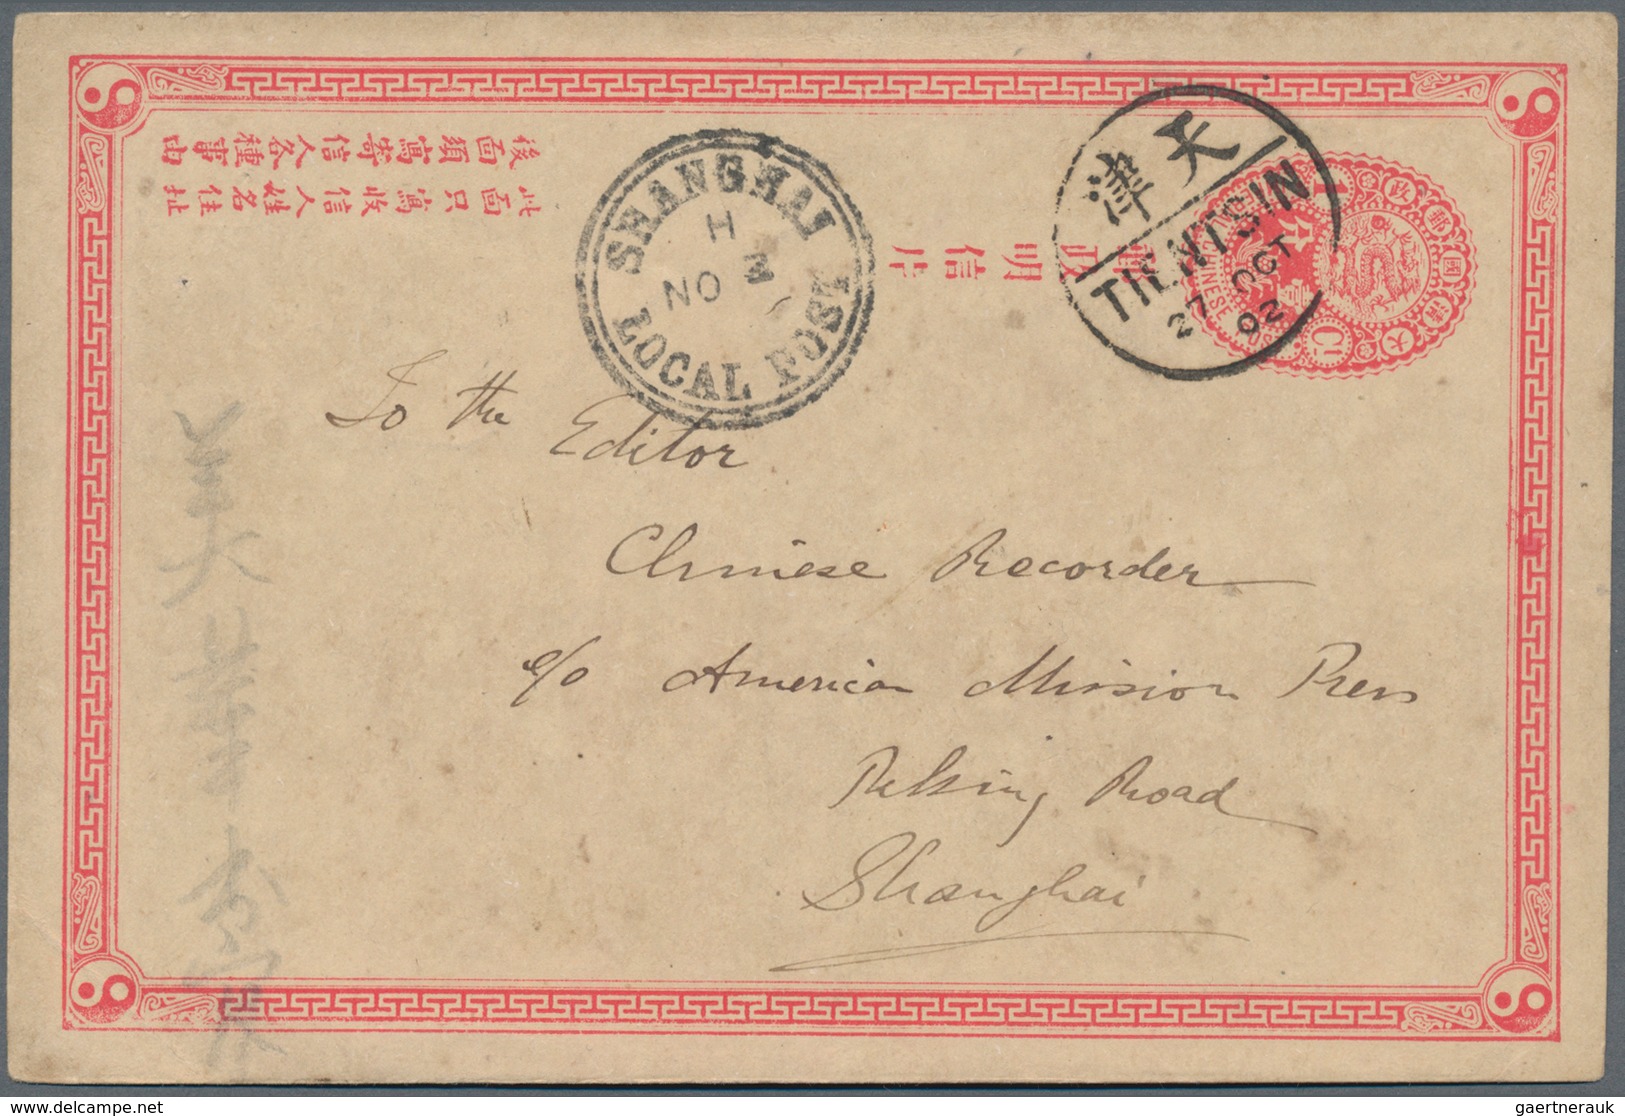 China - Ganzsachen: 1902. Imperial Chinese Post 1c Rose Postal Stationery Card (toned) Cancelled By - Ansichtskarten